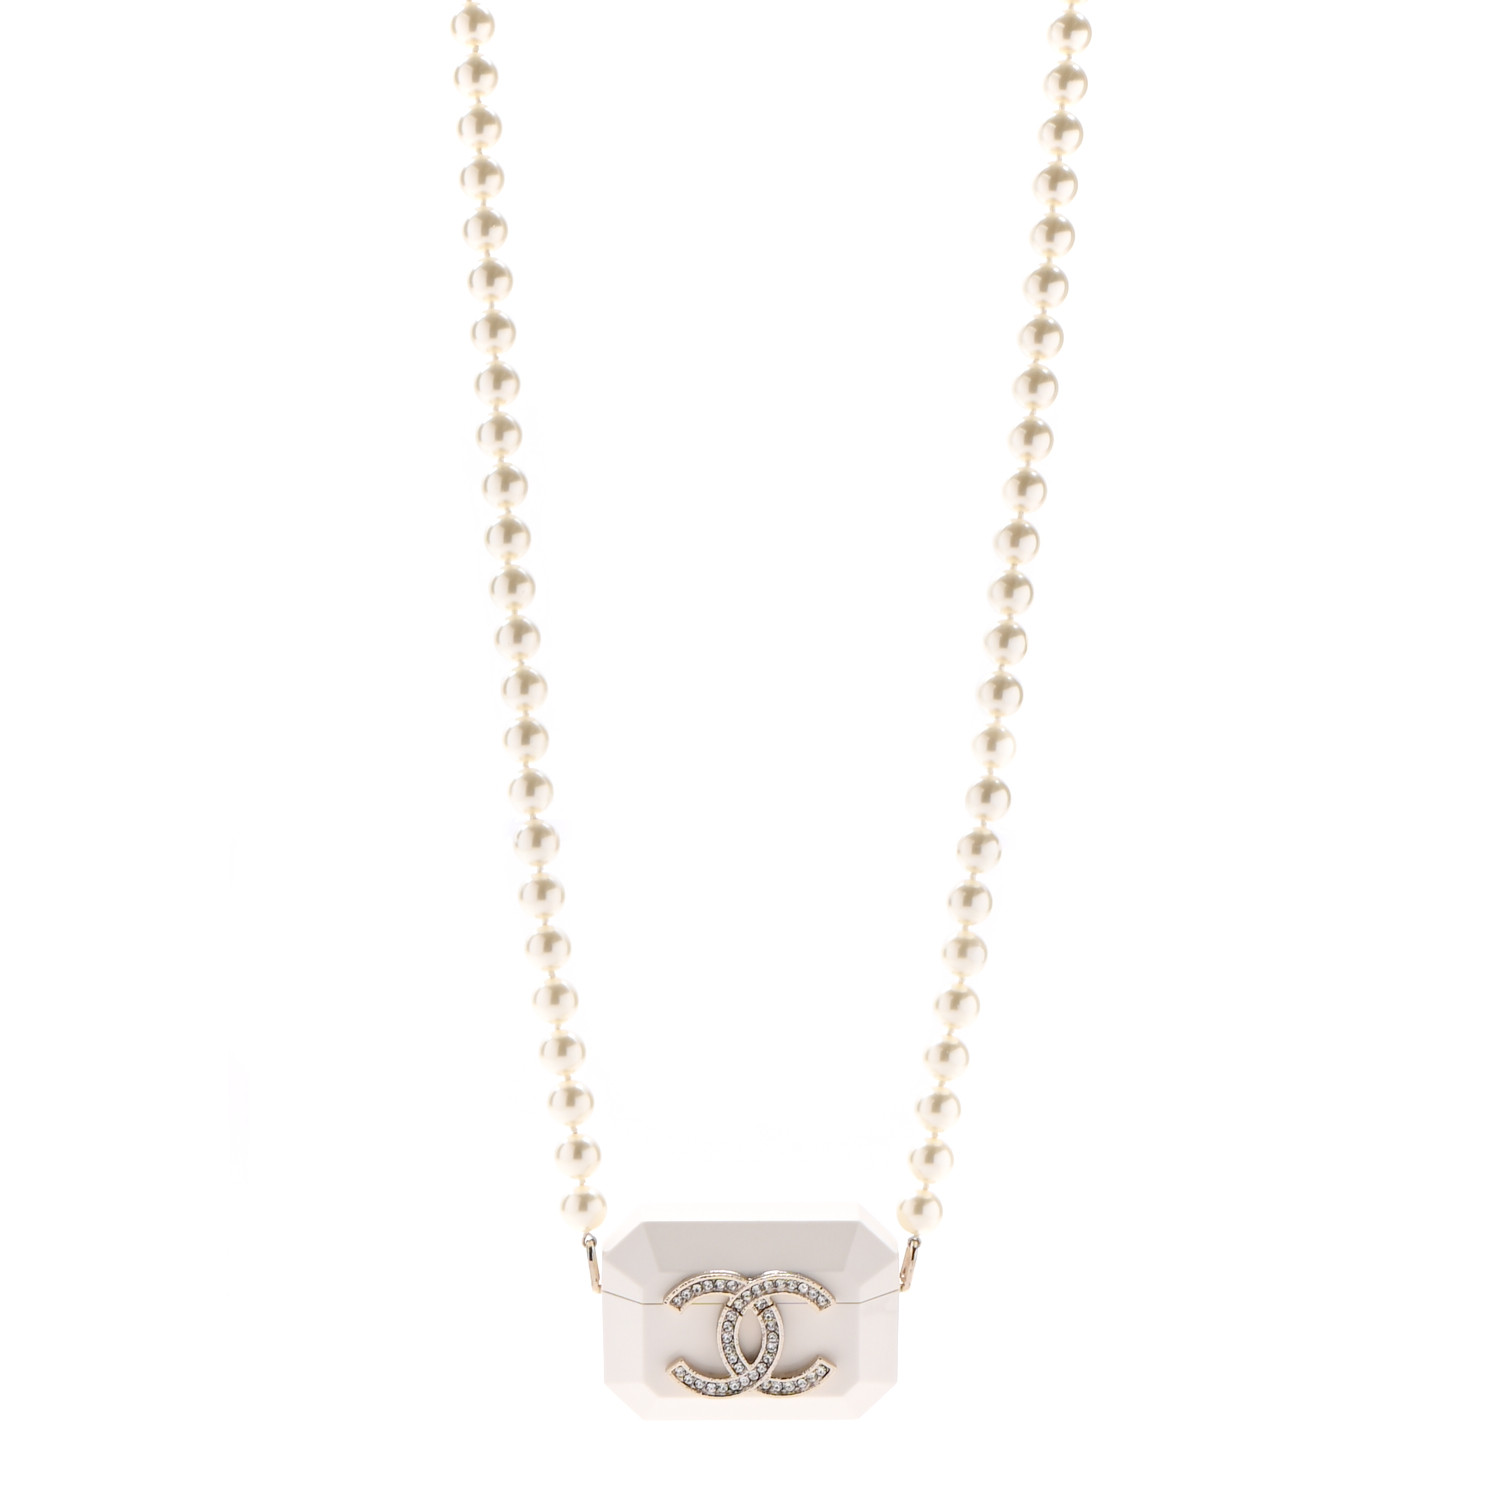 CHANEL Resin Crystal Pearl Airpod Pro Case Necklace Gold White Pearly ...